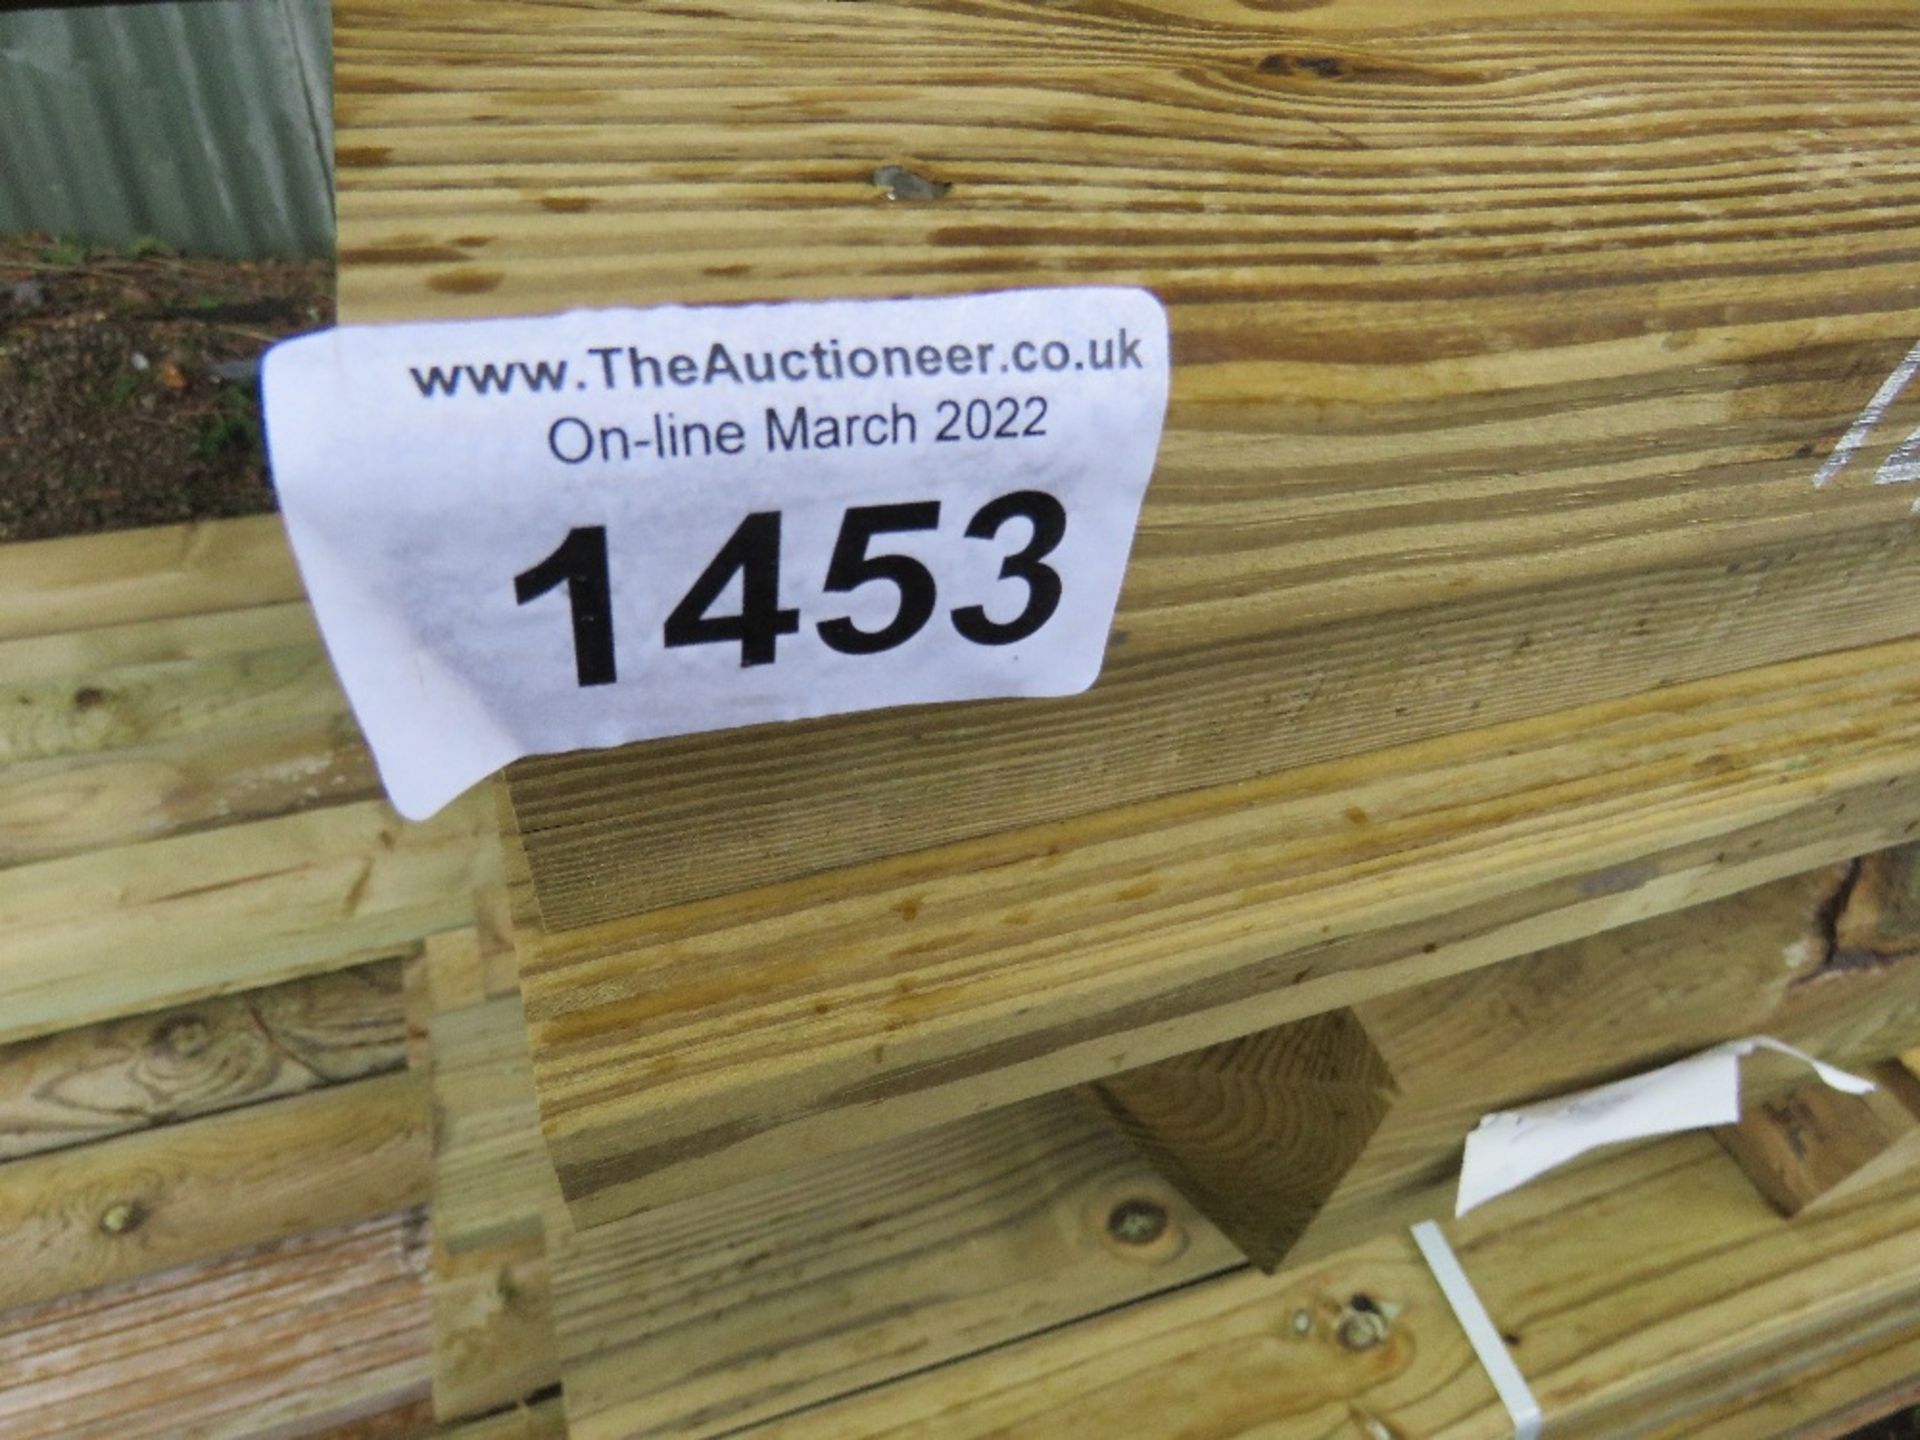 LARGE STACK OF ASSORTED TIMBER POSTS, ROLL OF WIRE, BOARDS ETC. 6FT -12FT APPROX. - Image 4 of 9